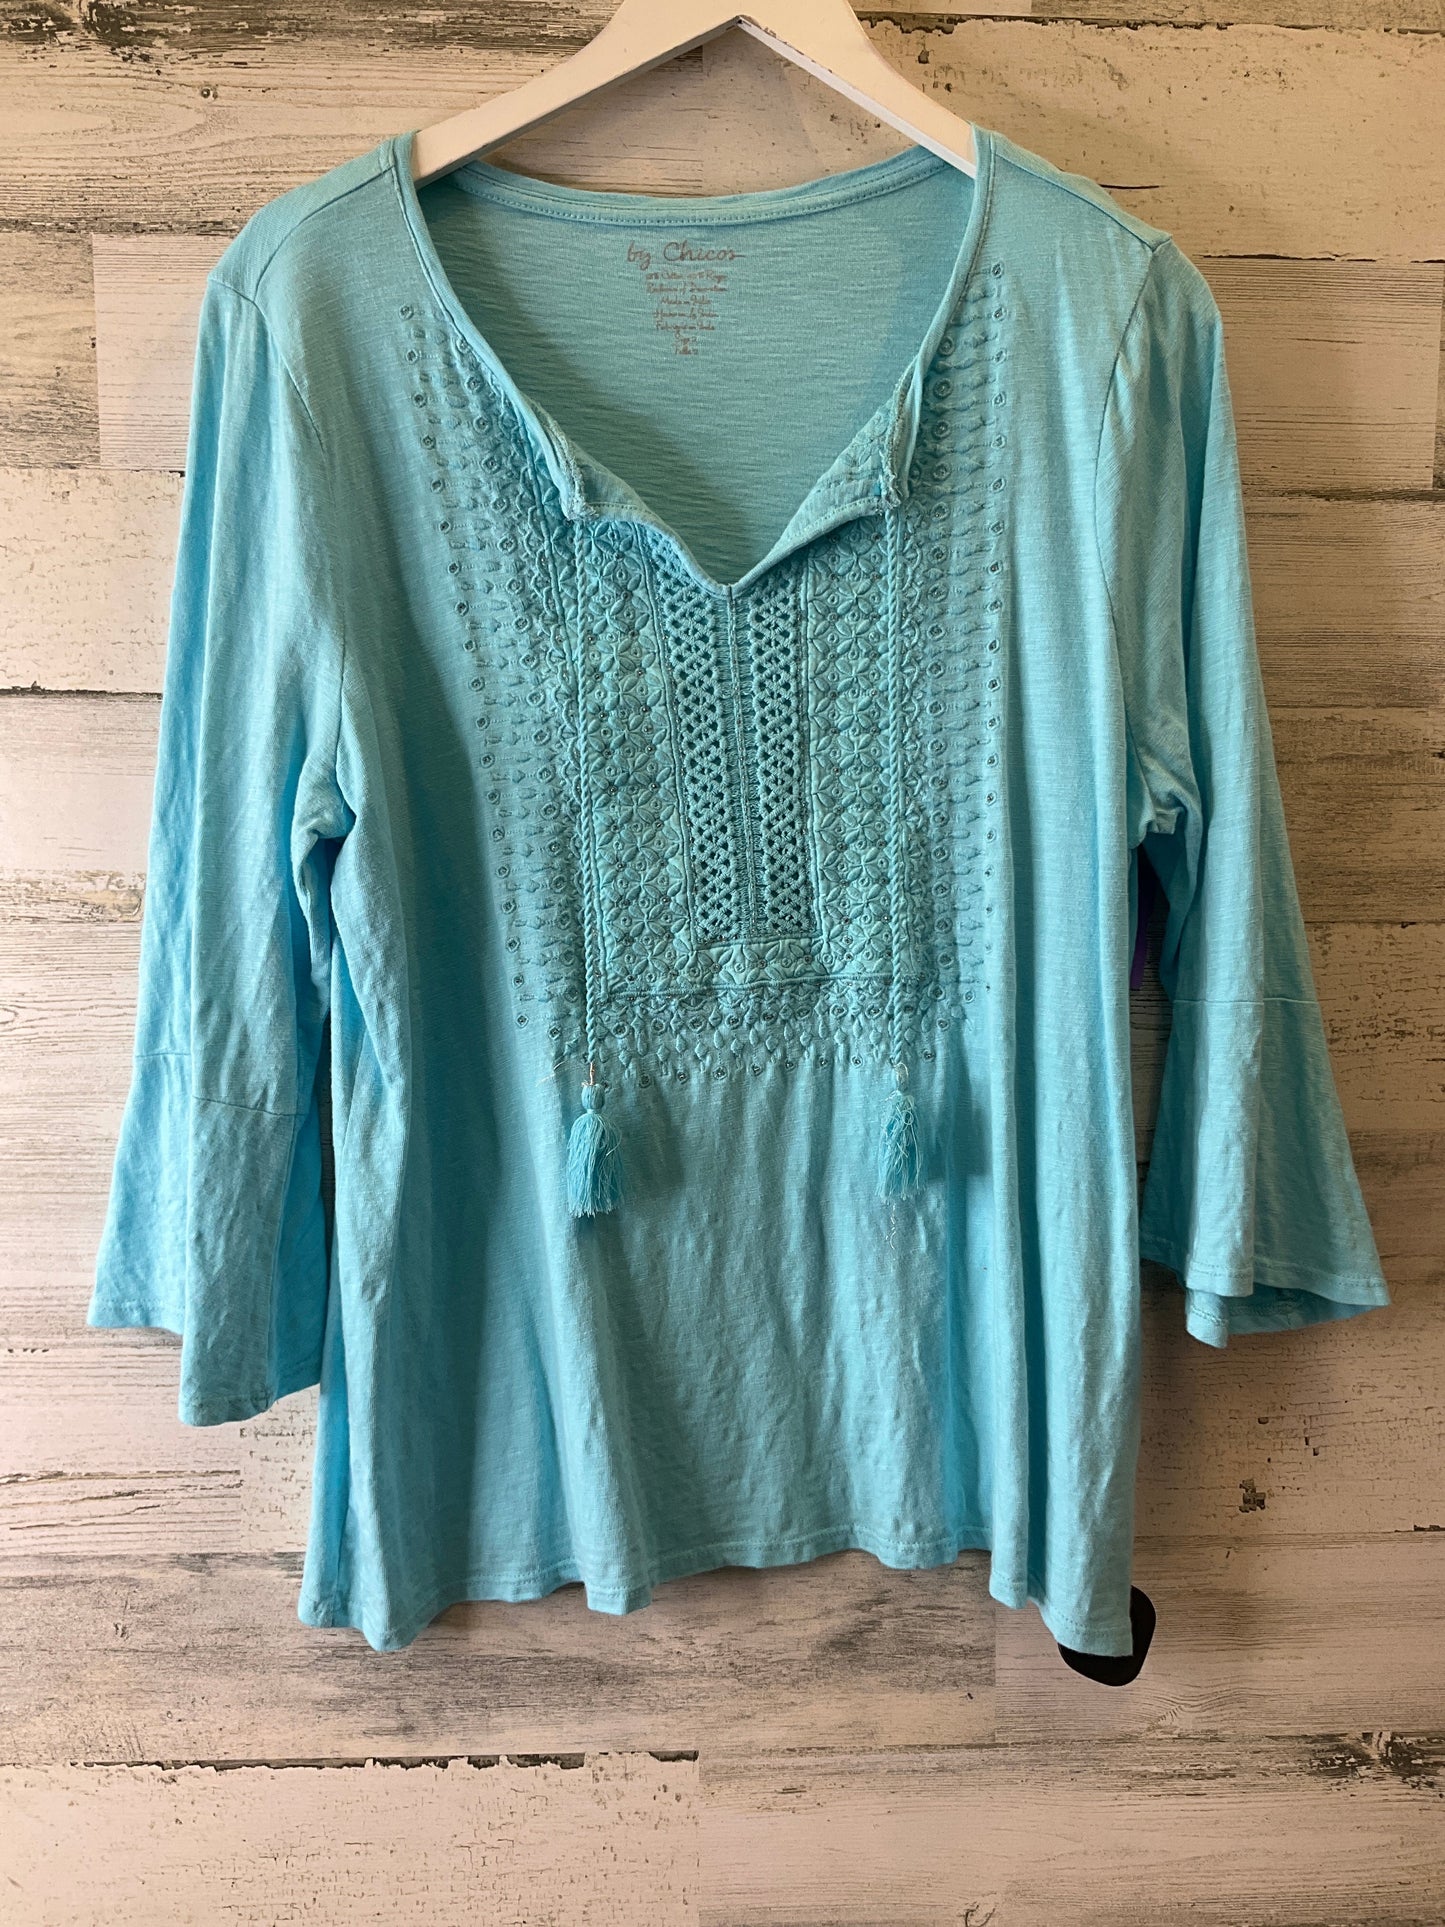 Blue Top 3/4 Sleeve Chicos, Size L